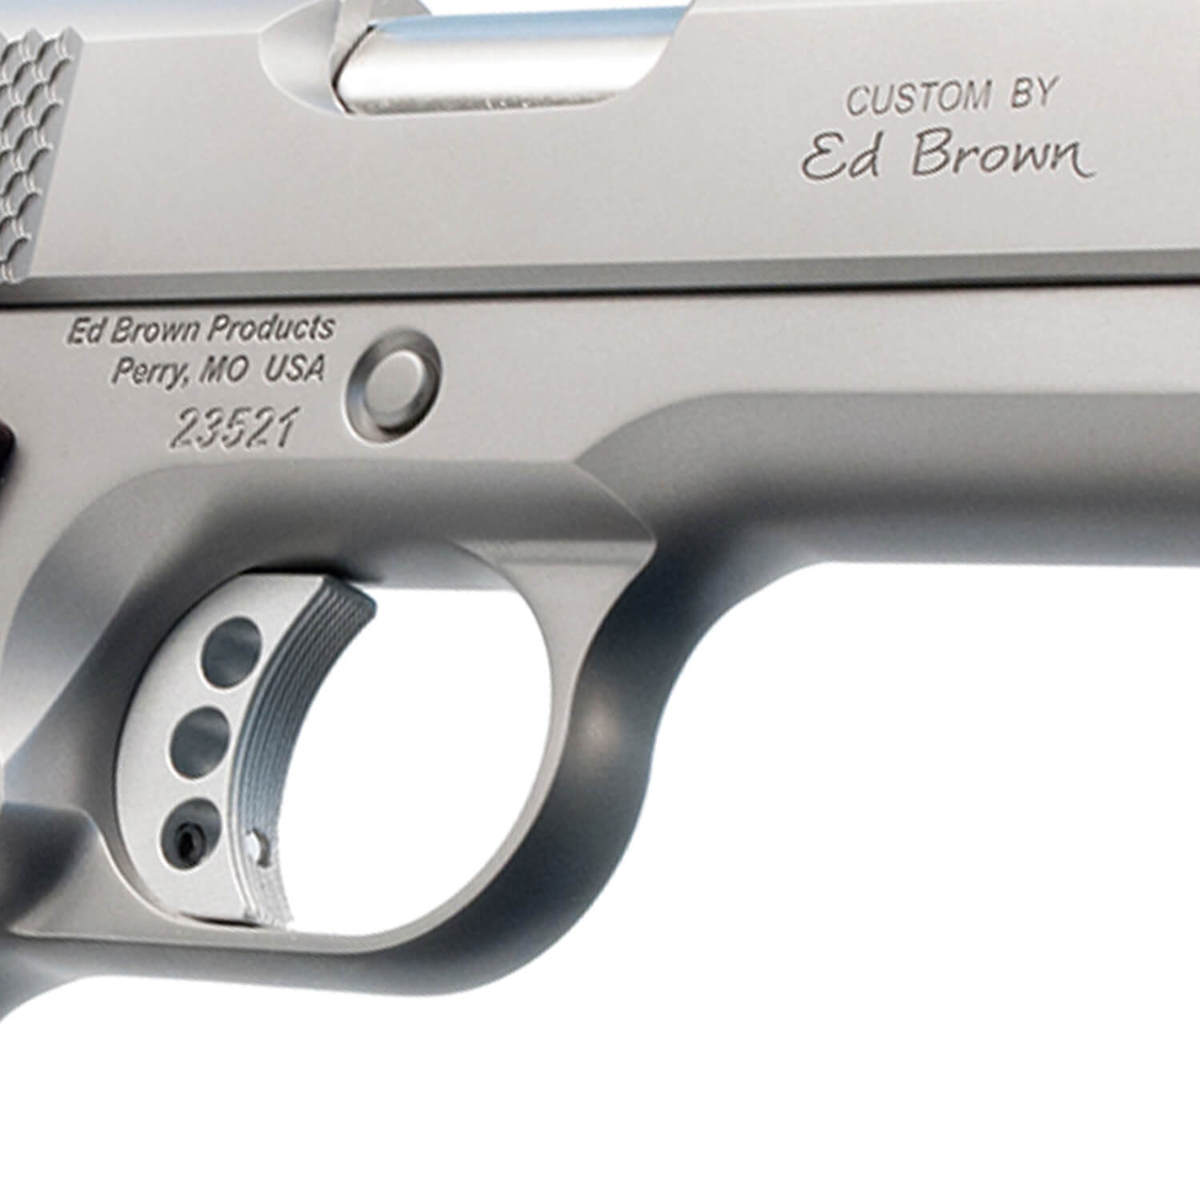 Ed Brown 18 CCO 45 Auto (ACP) 4.25in Stainless-Brown Pistol - 7+1 Rounds-img-2